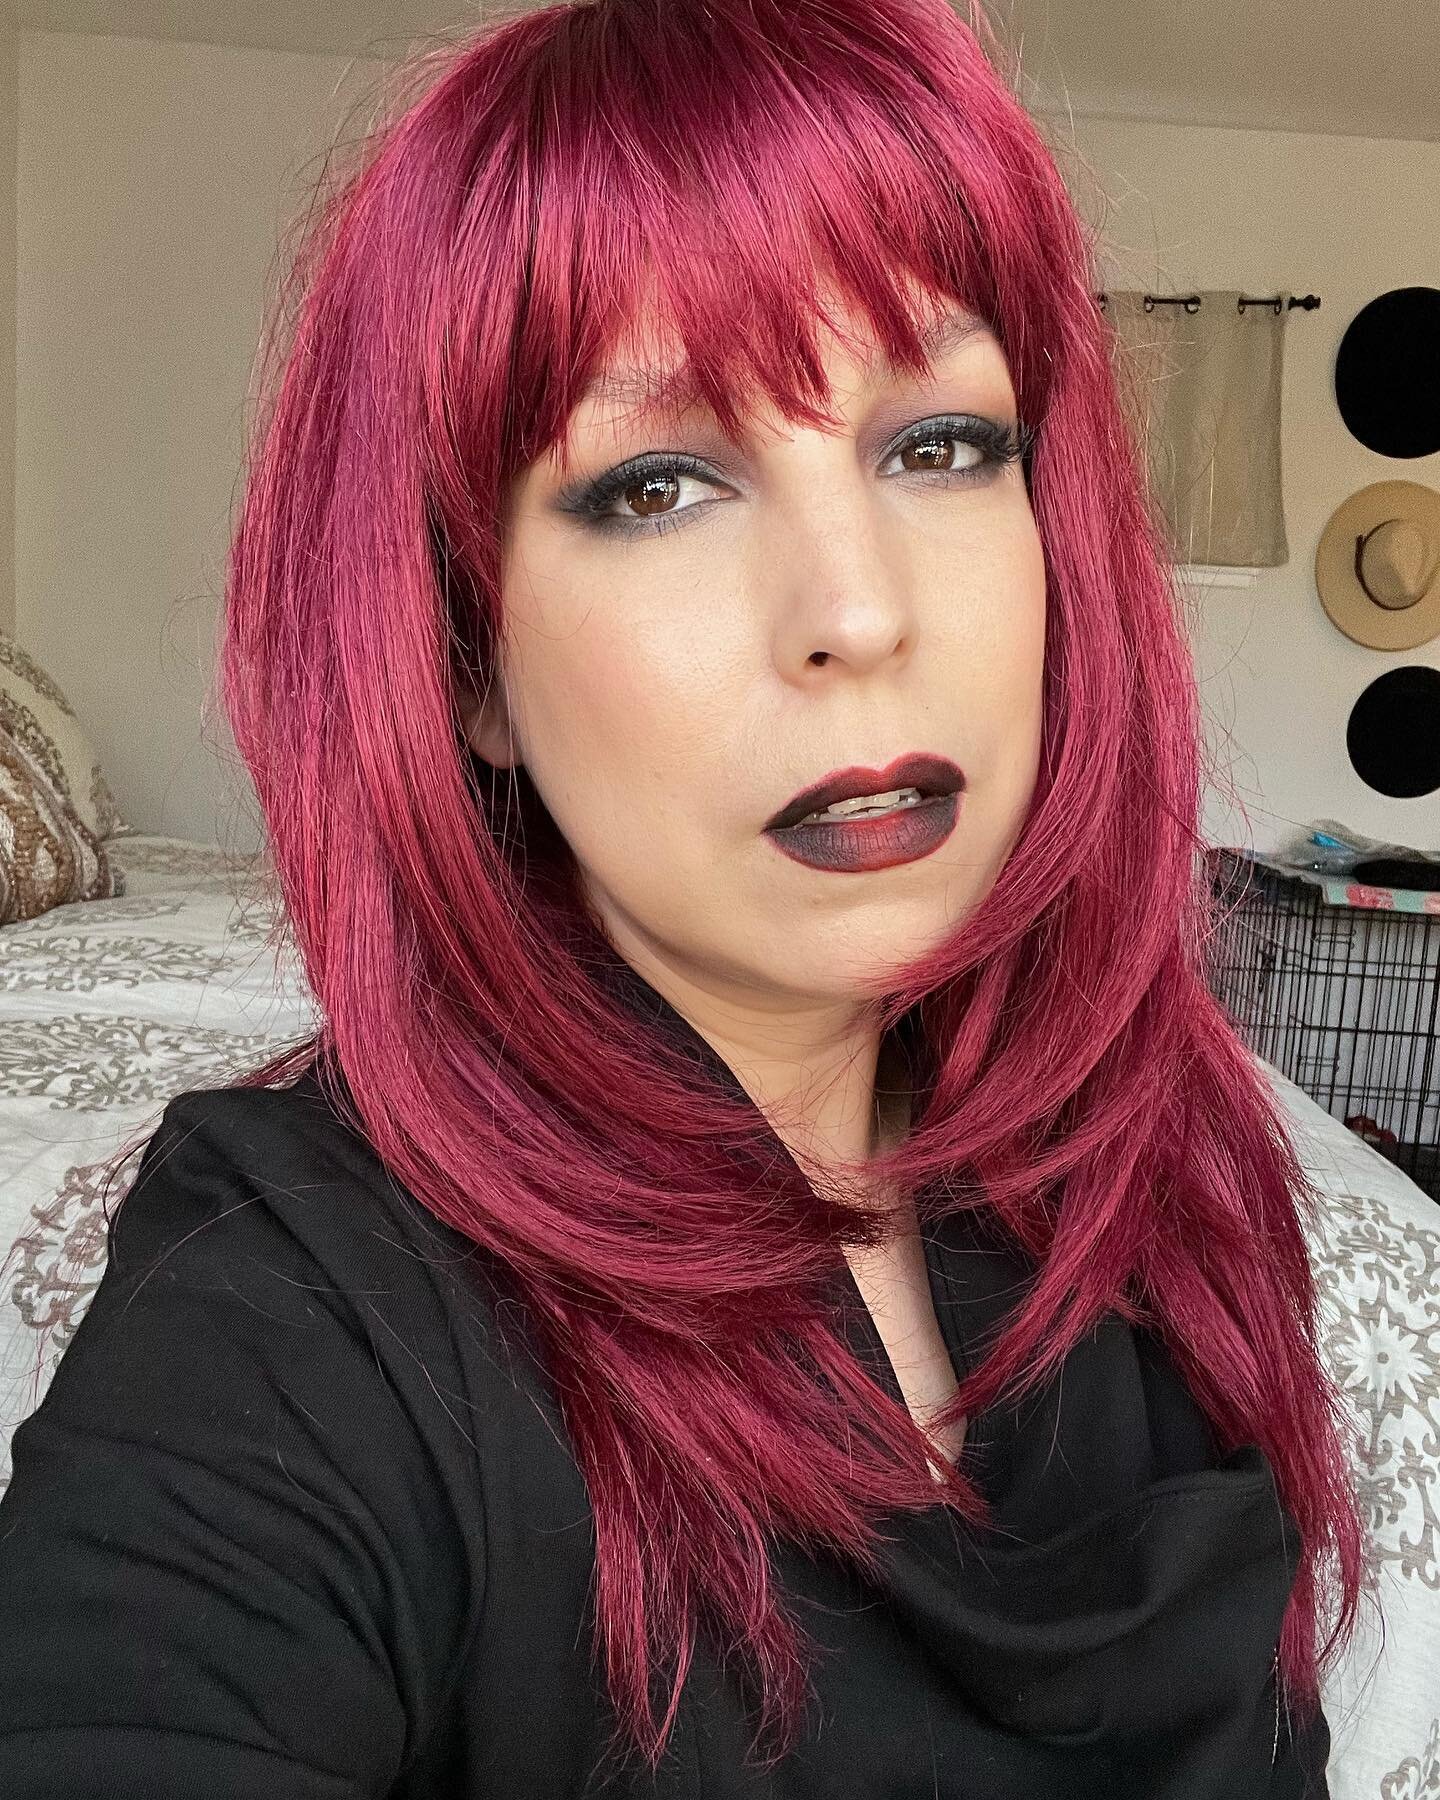 My alter ego. She&rsquo;s sassy. She&rsquo;s fierce. She gets shit done. What should her name be? 

#alterego #anotherme #sassybitch #mua #redwig #redhair #ombrelips #promakeupartist #befierce